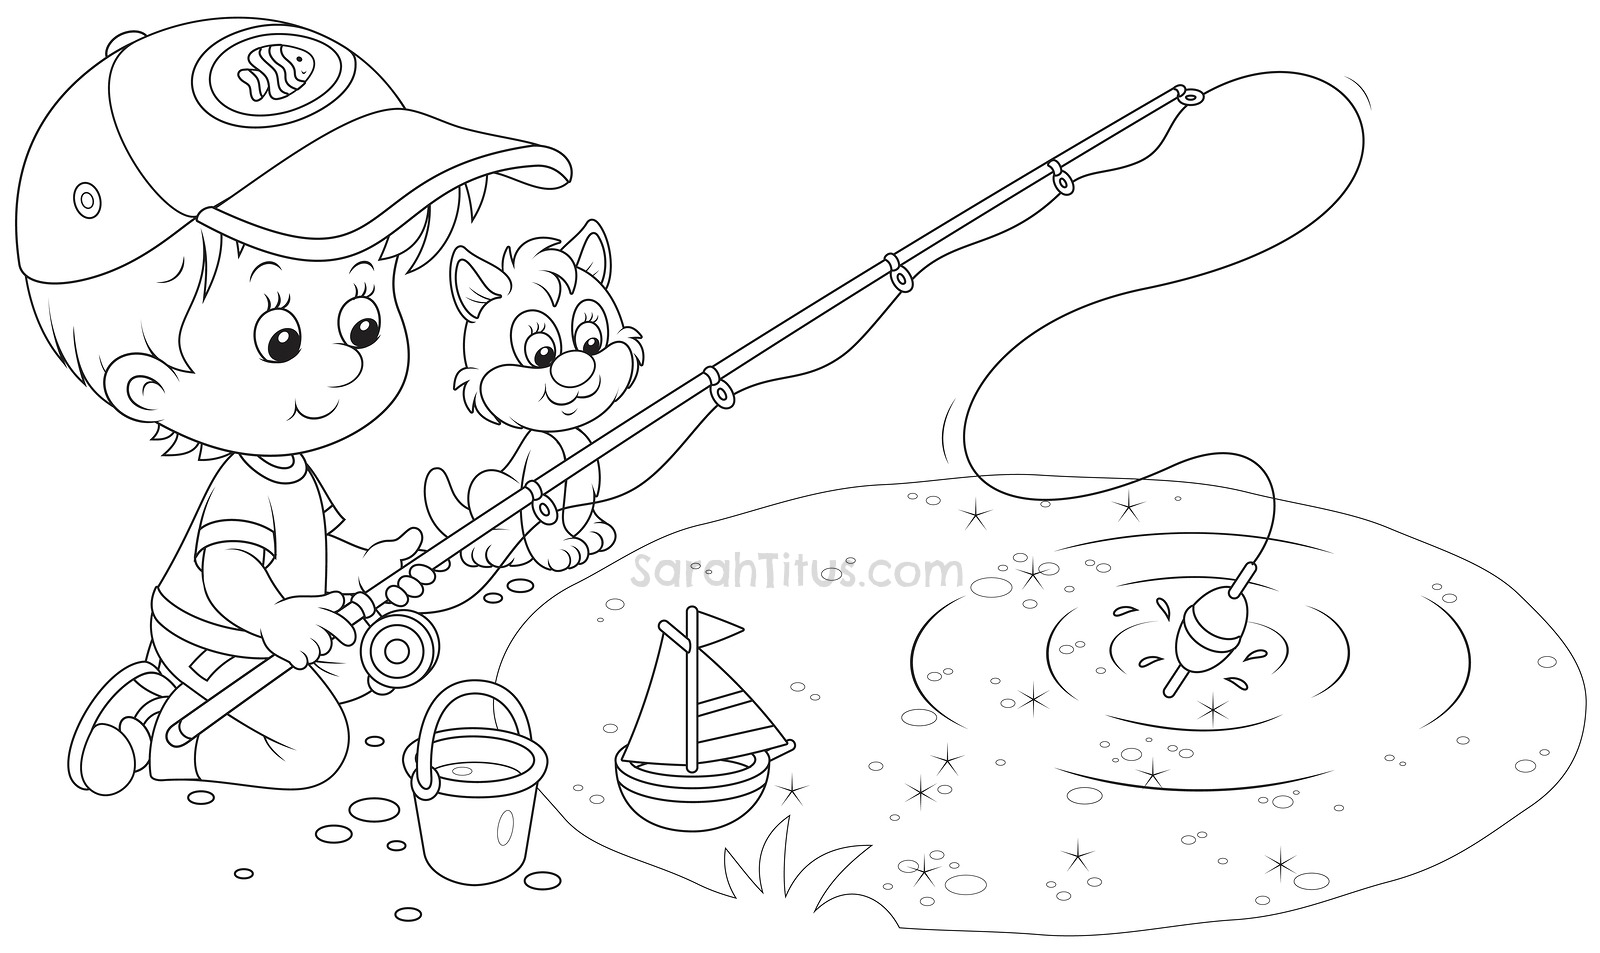 Pond Life Coloring Pages Free Summer Fun Coloring Pages